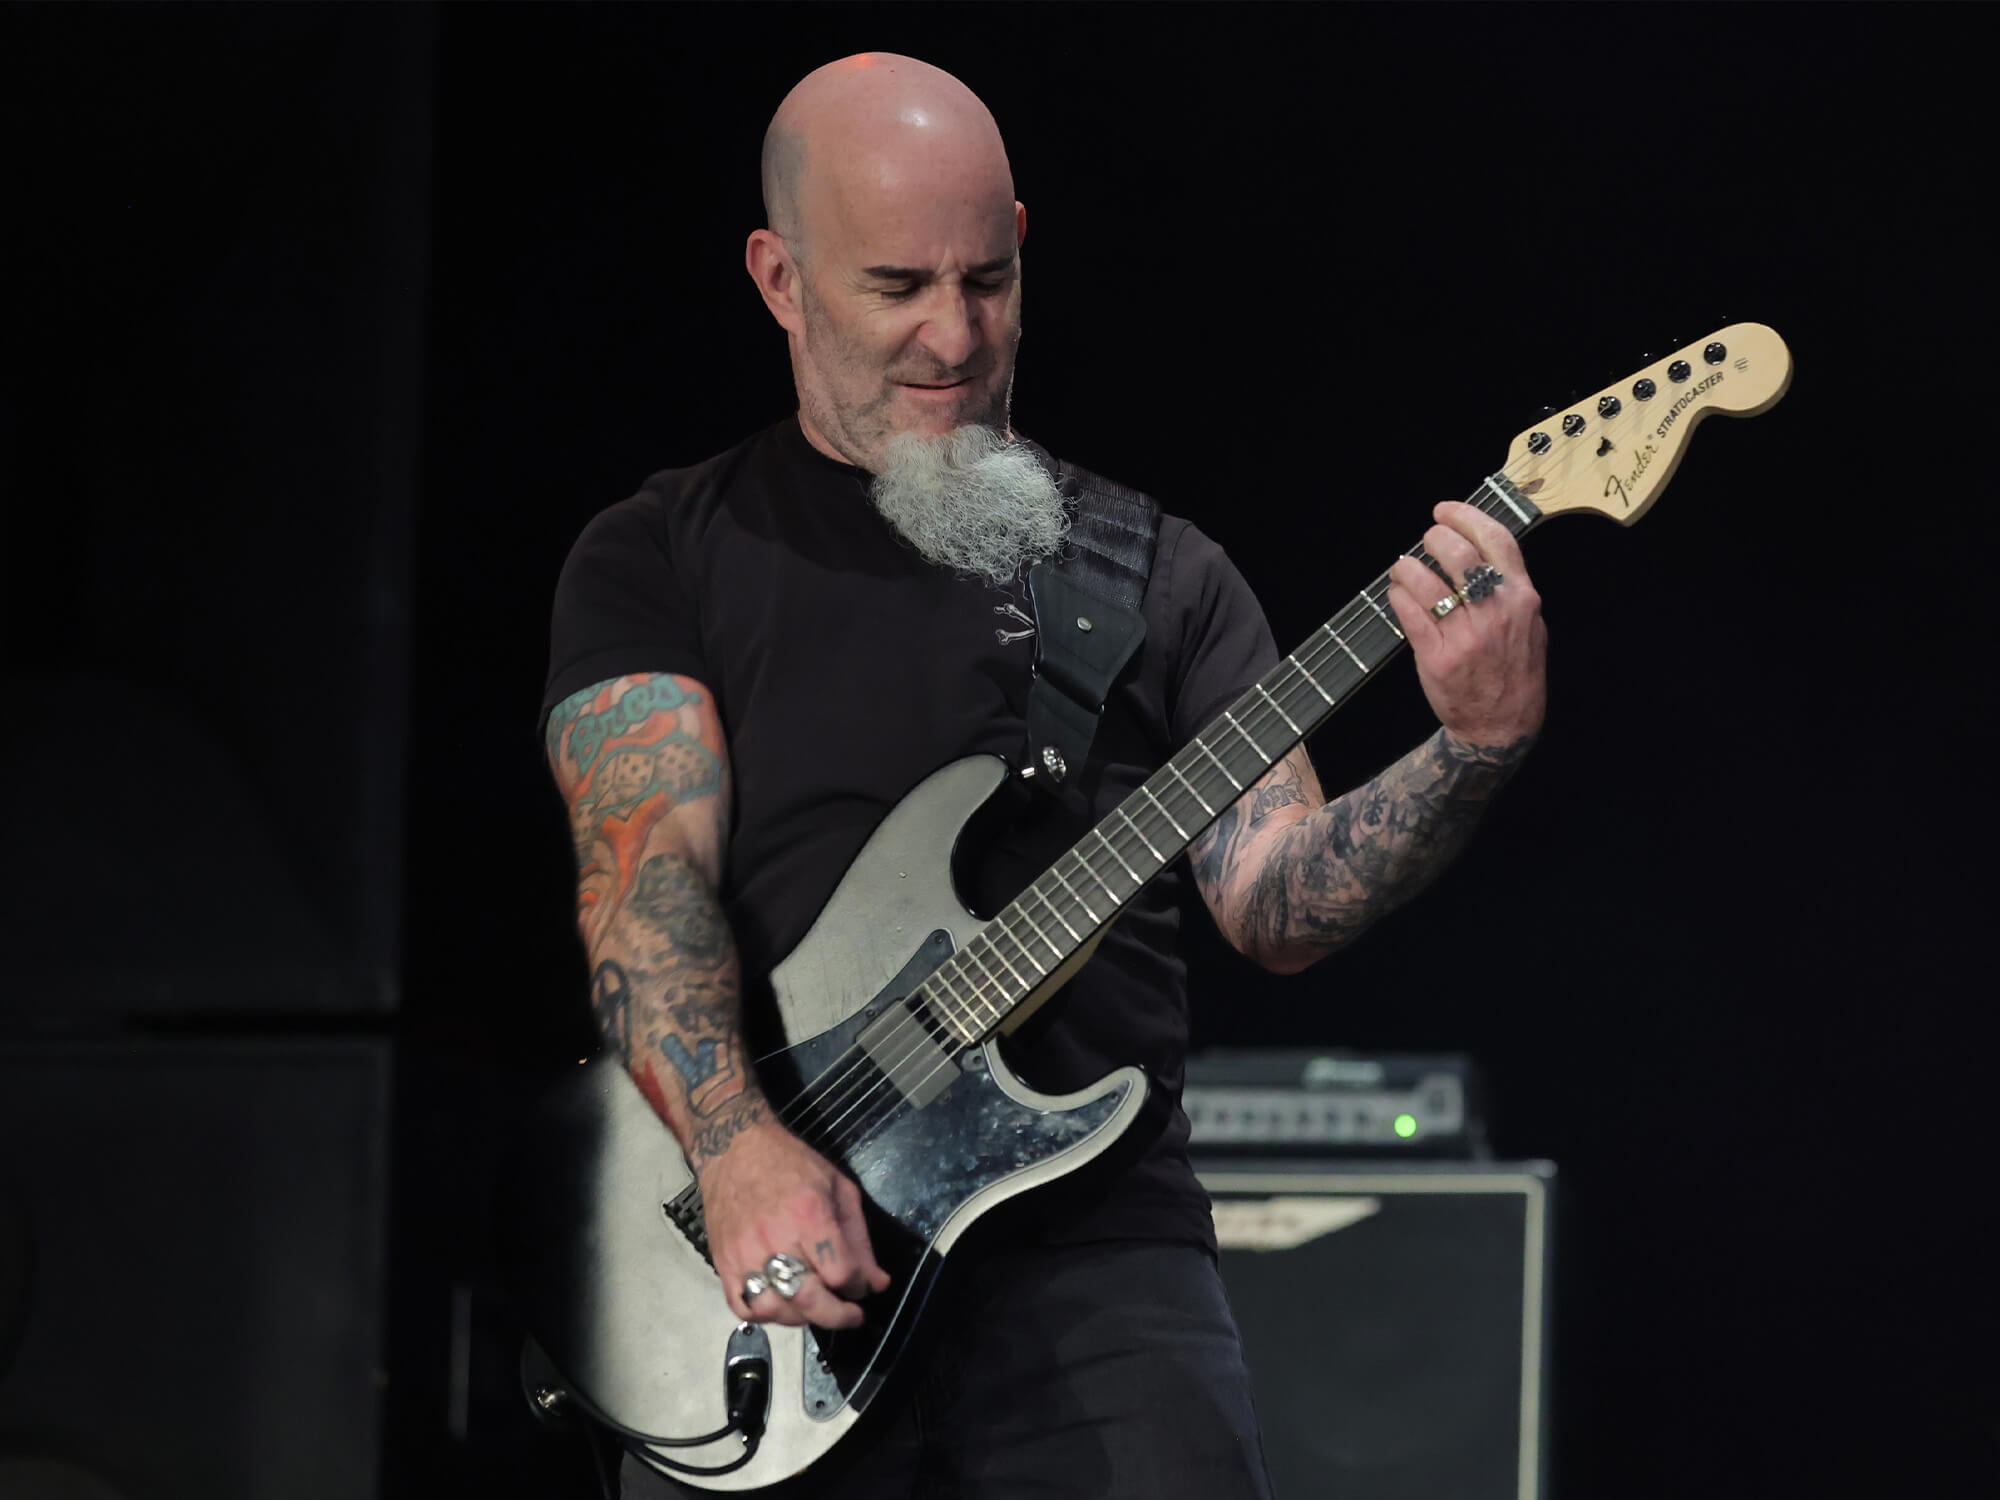 Scott Ian playing a grey Strat guitar. His arm is extended in a large strum and his face is screwed up with passion. He has a long grey beard which runs down from his chin.